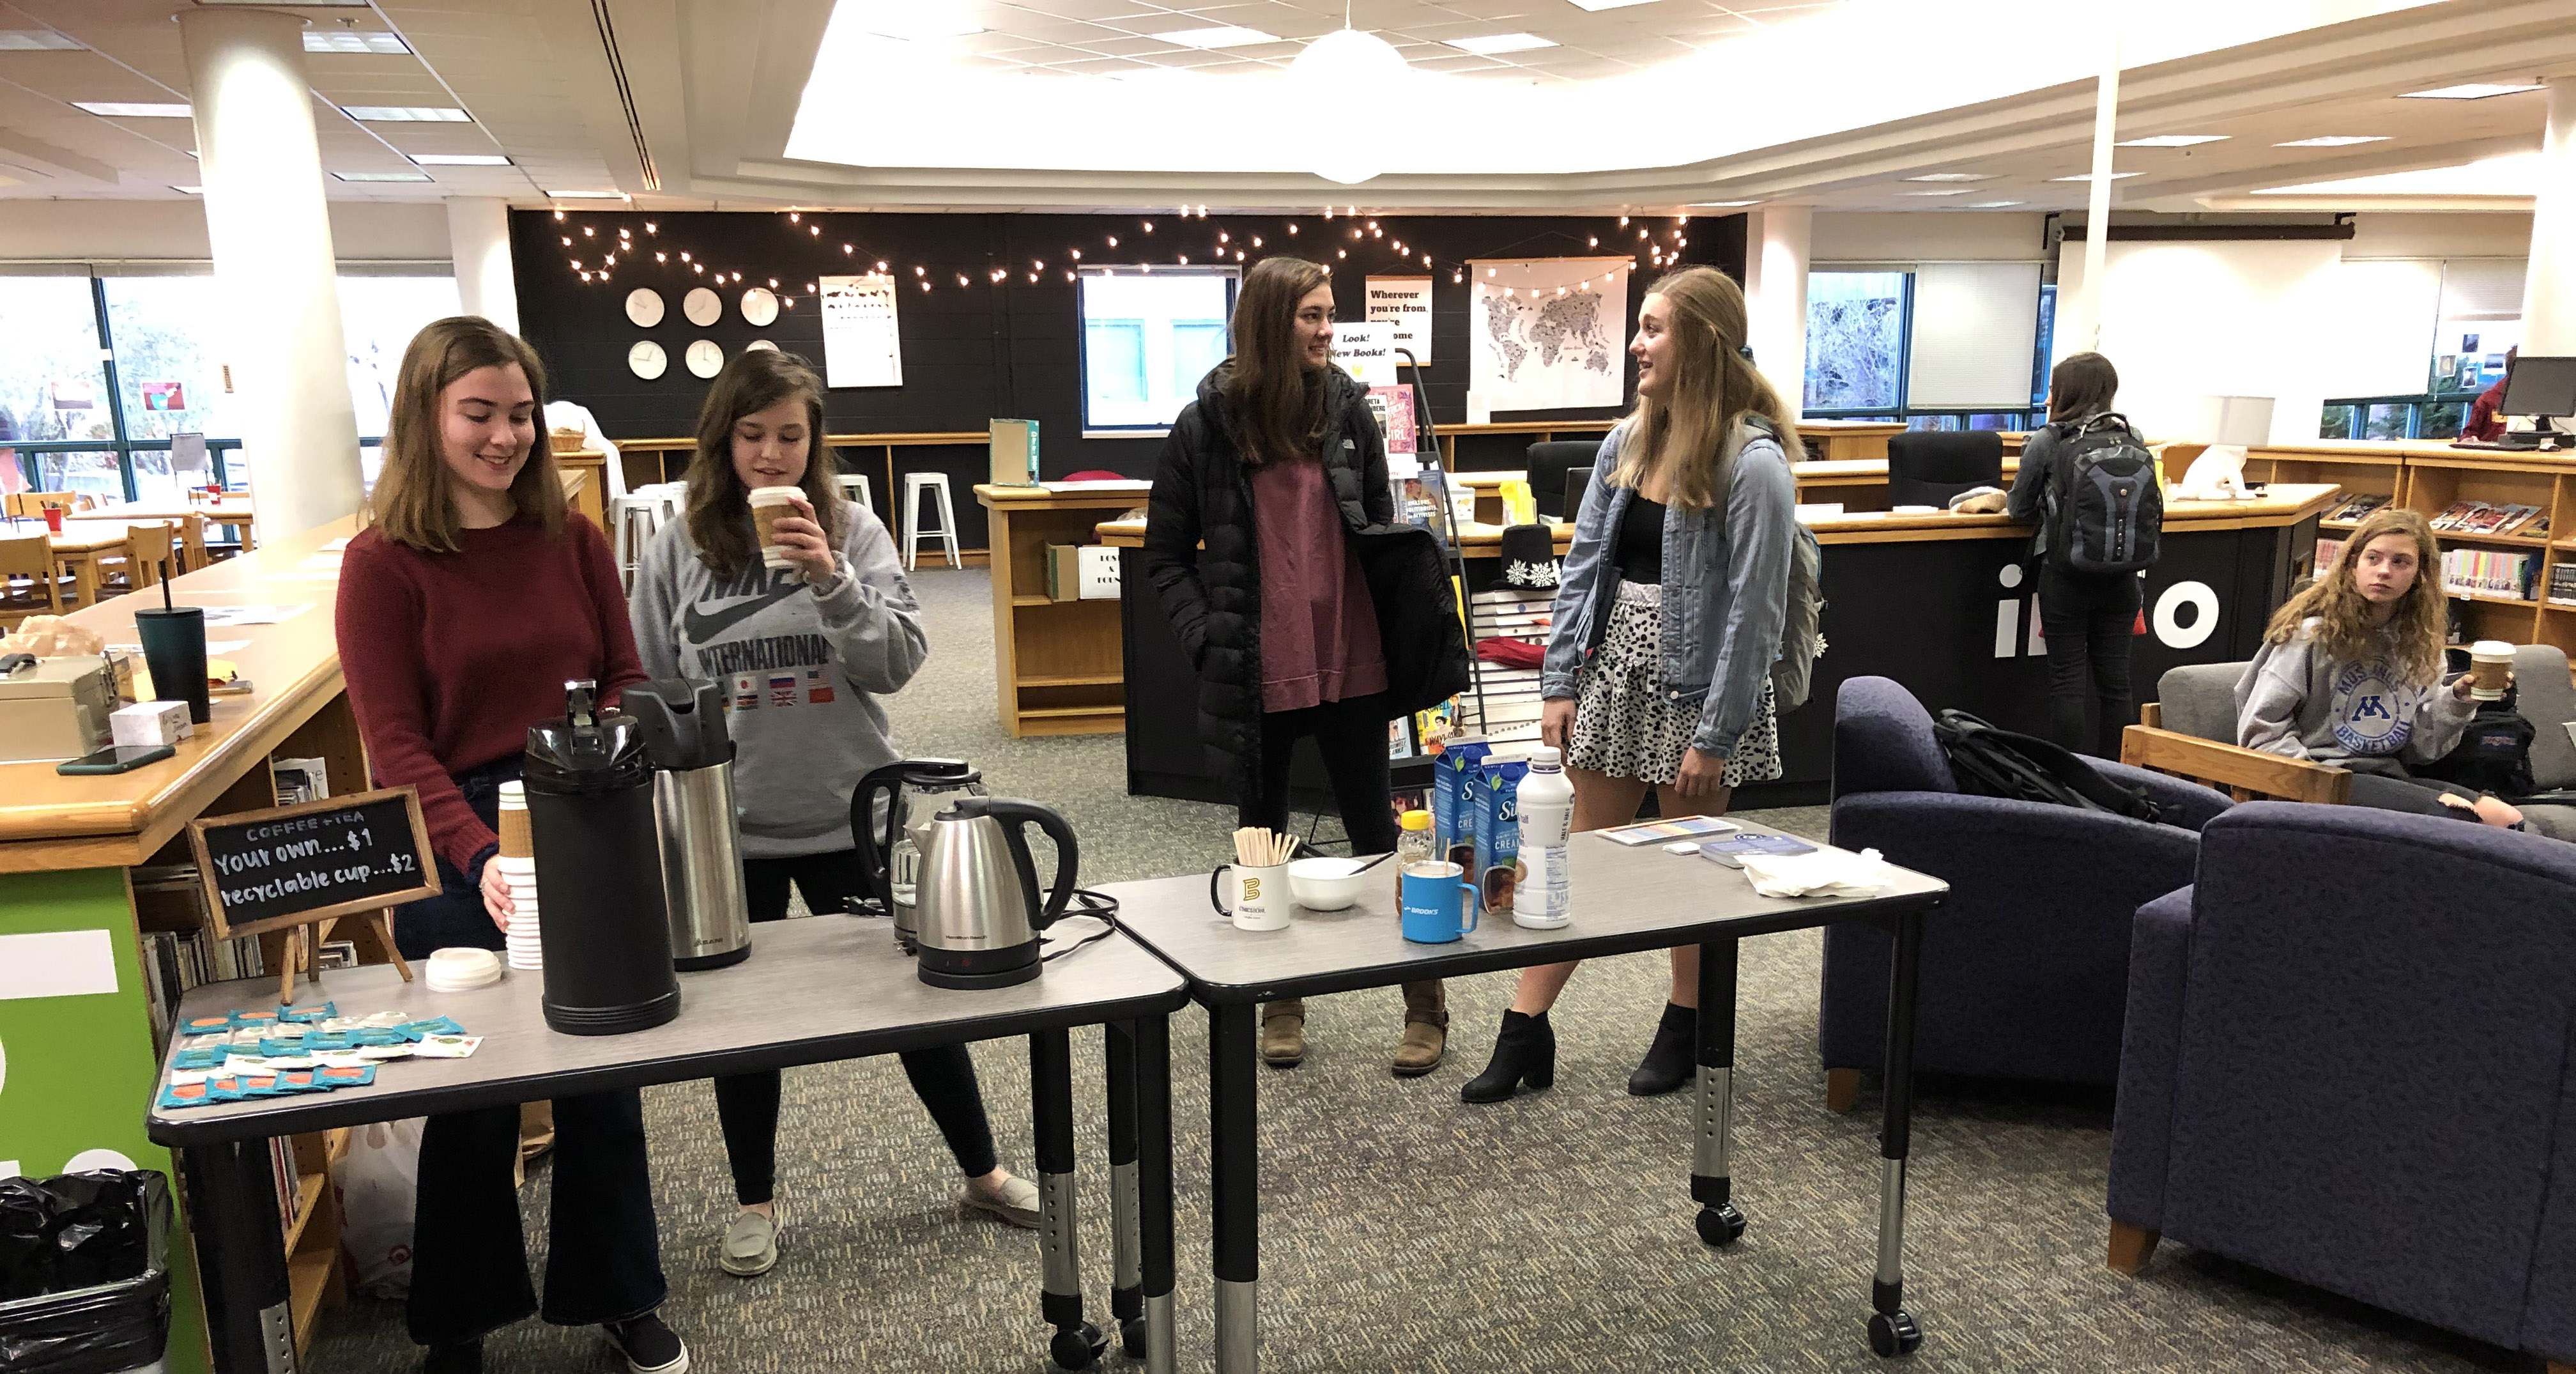 Students selling coffee in the school library